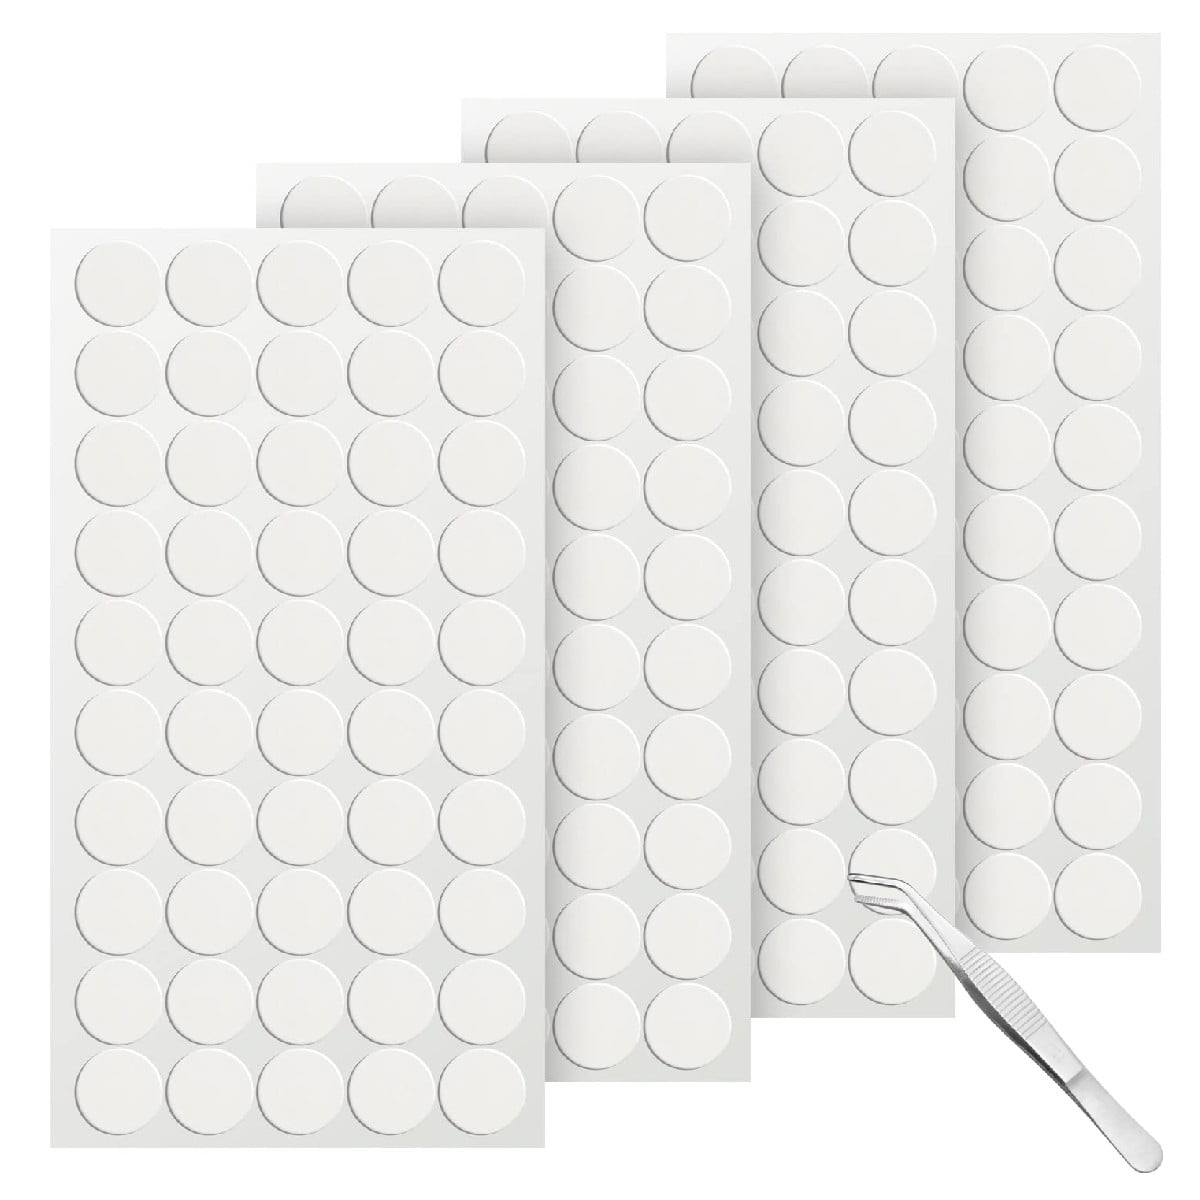 0.8 Double Sided Adhesive Dots, 350 Pack Clear Sticky Tack Square Putty